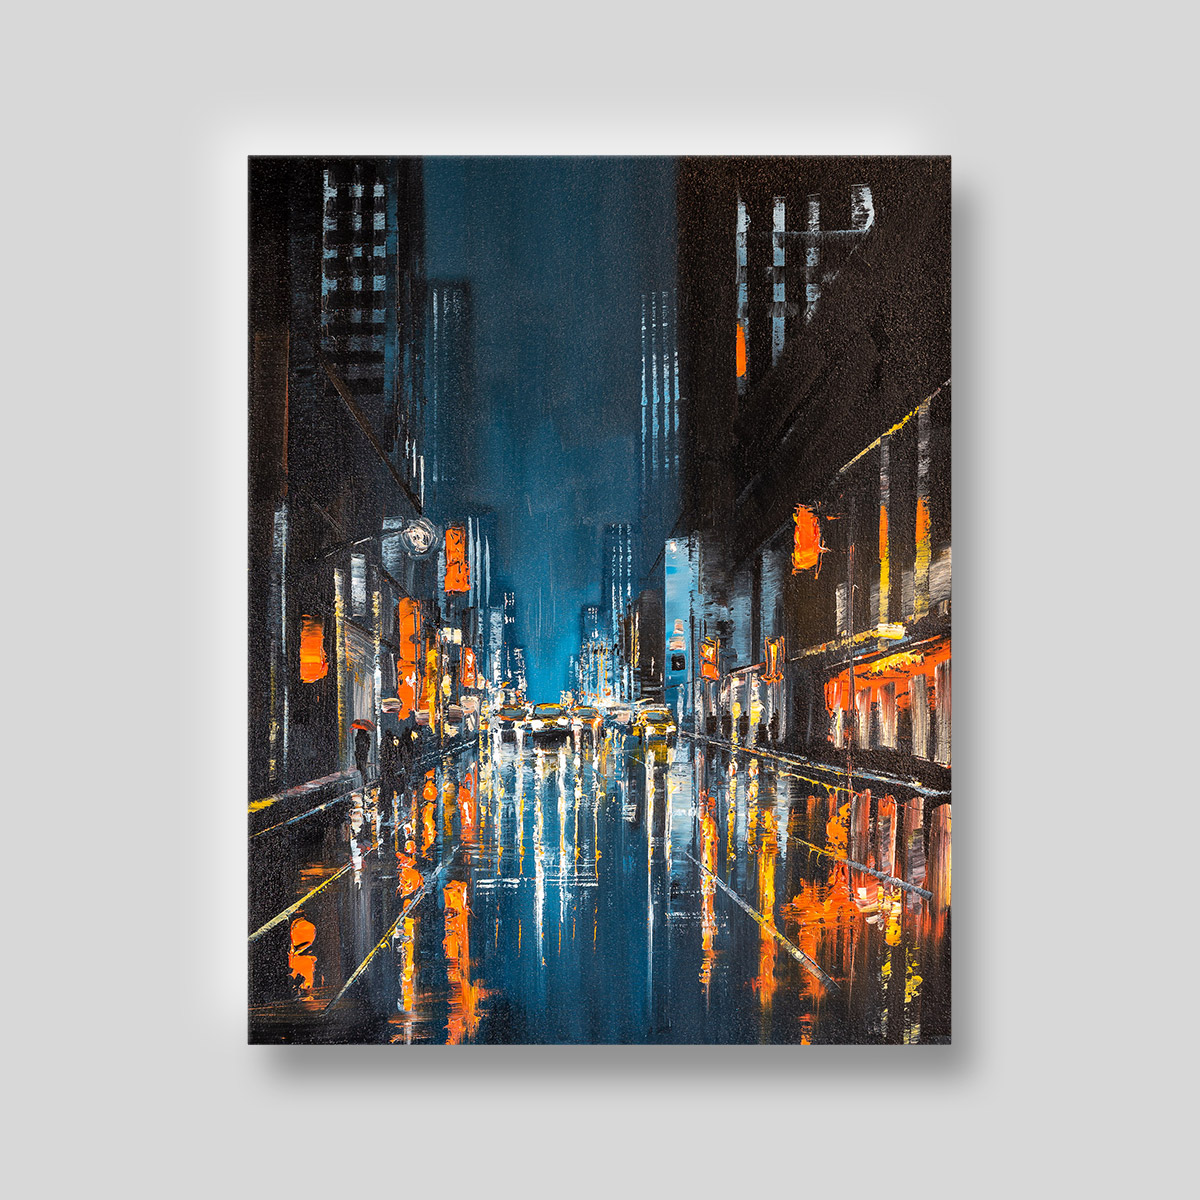 Light Up The Dark by Paul Kenton, UK contemporary cityscape artist, an original painting from his New York Collection